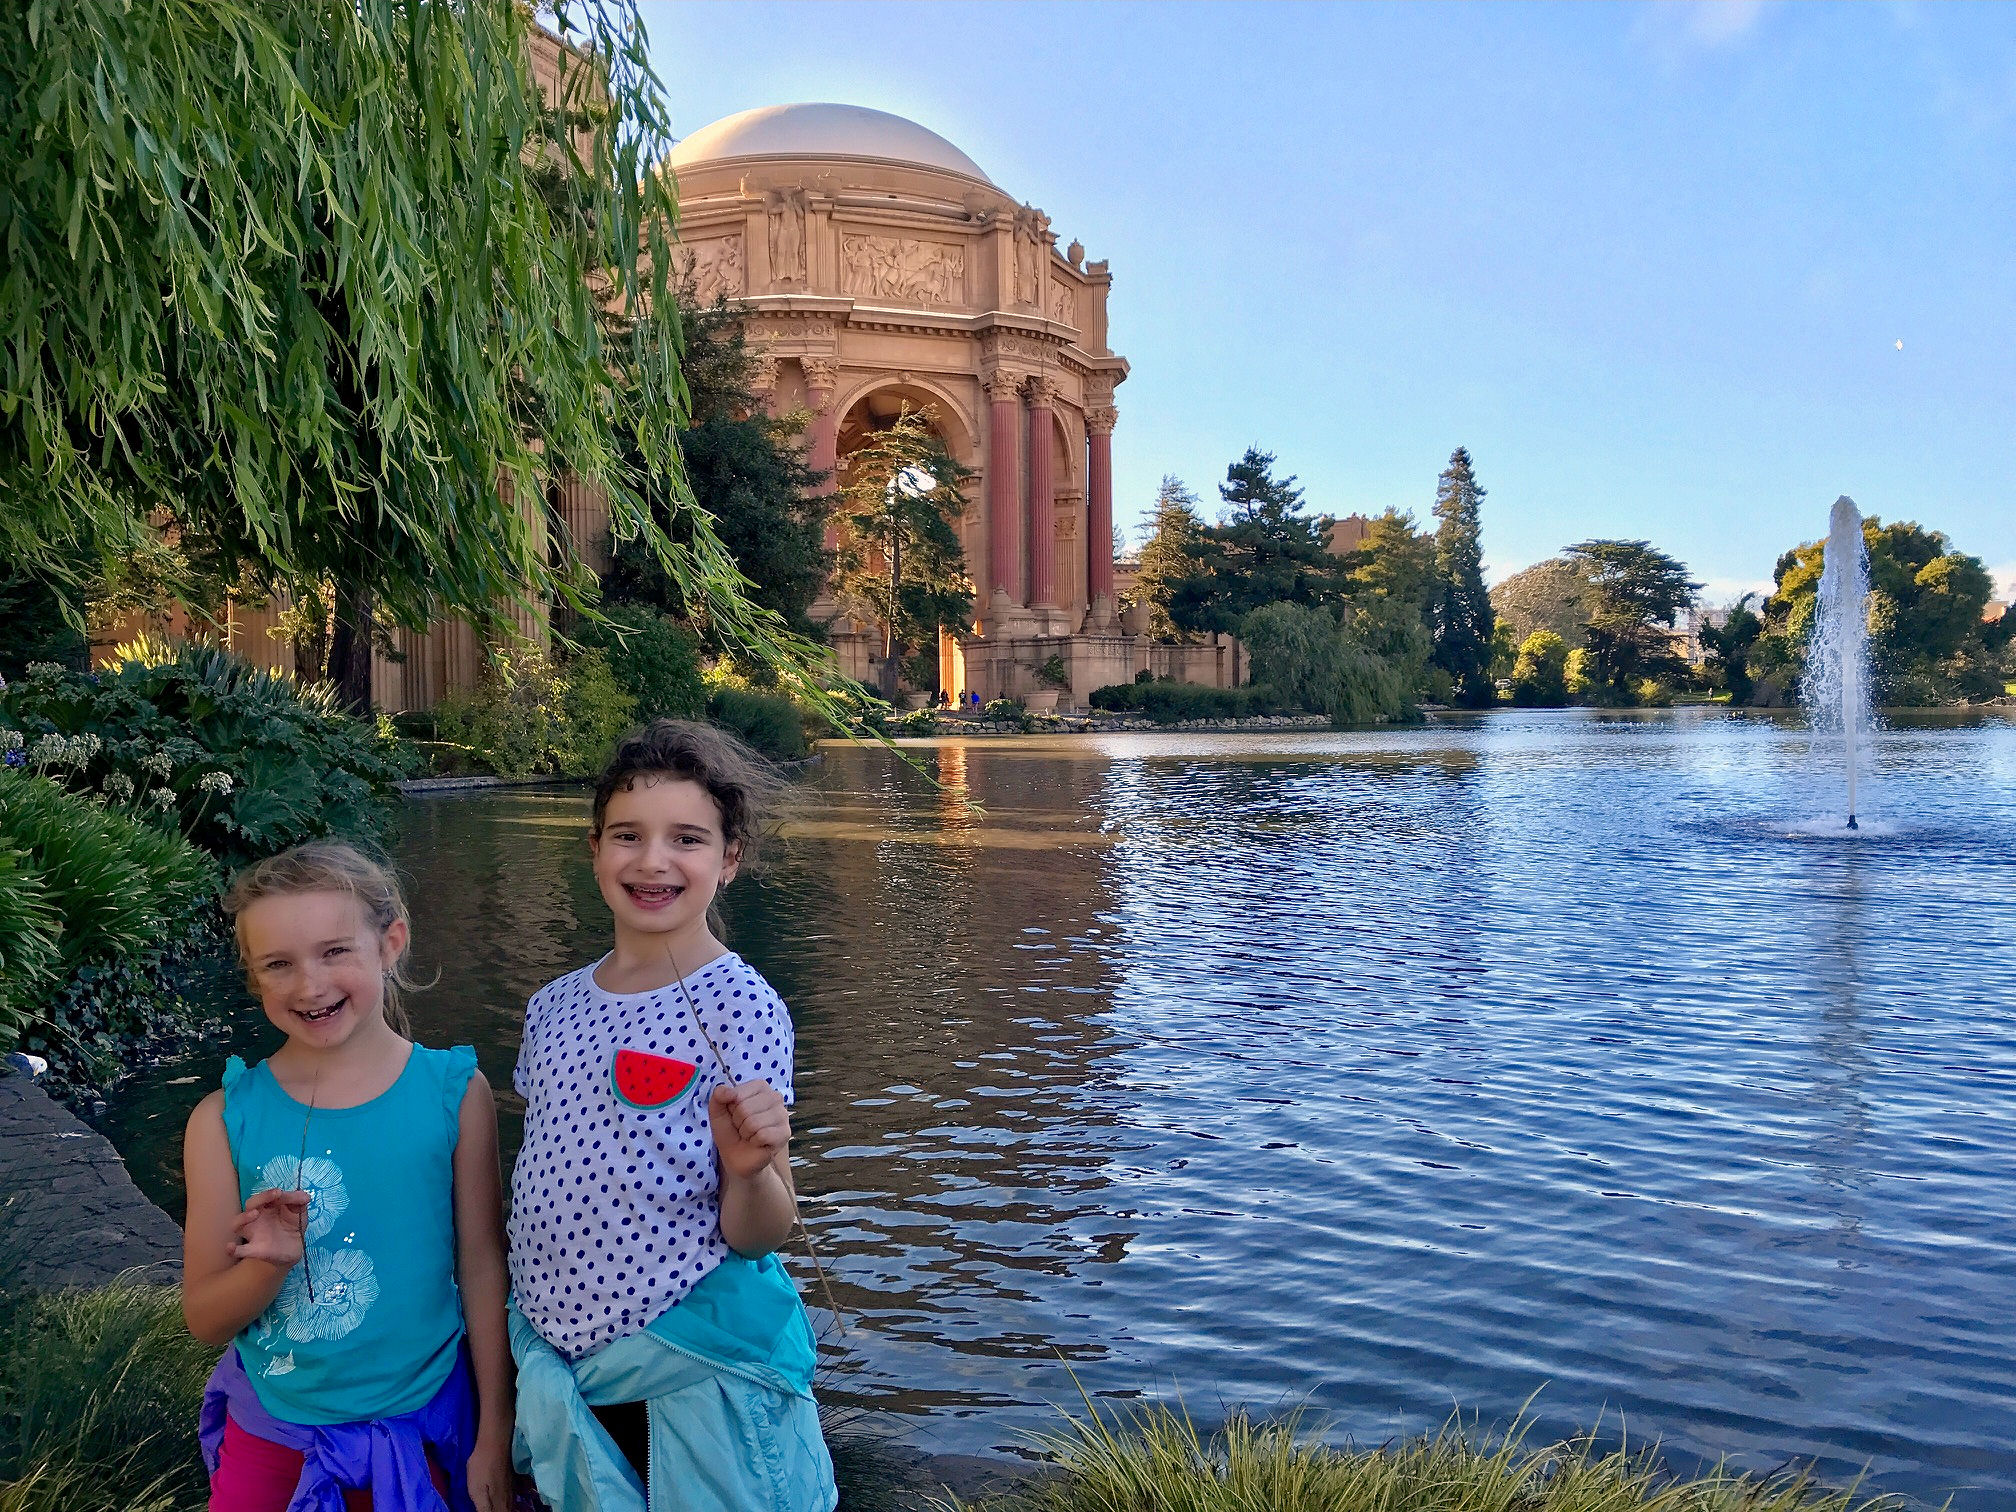 Kids posing with the Palace of Fine Arts